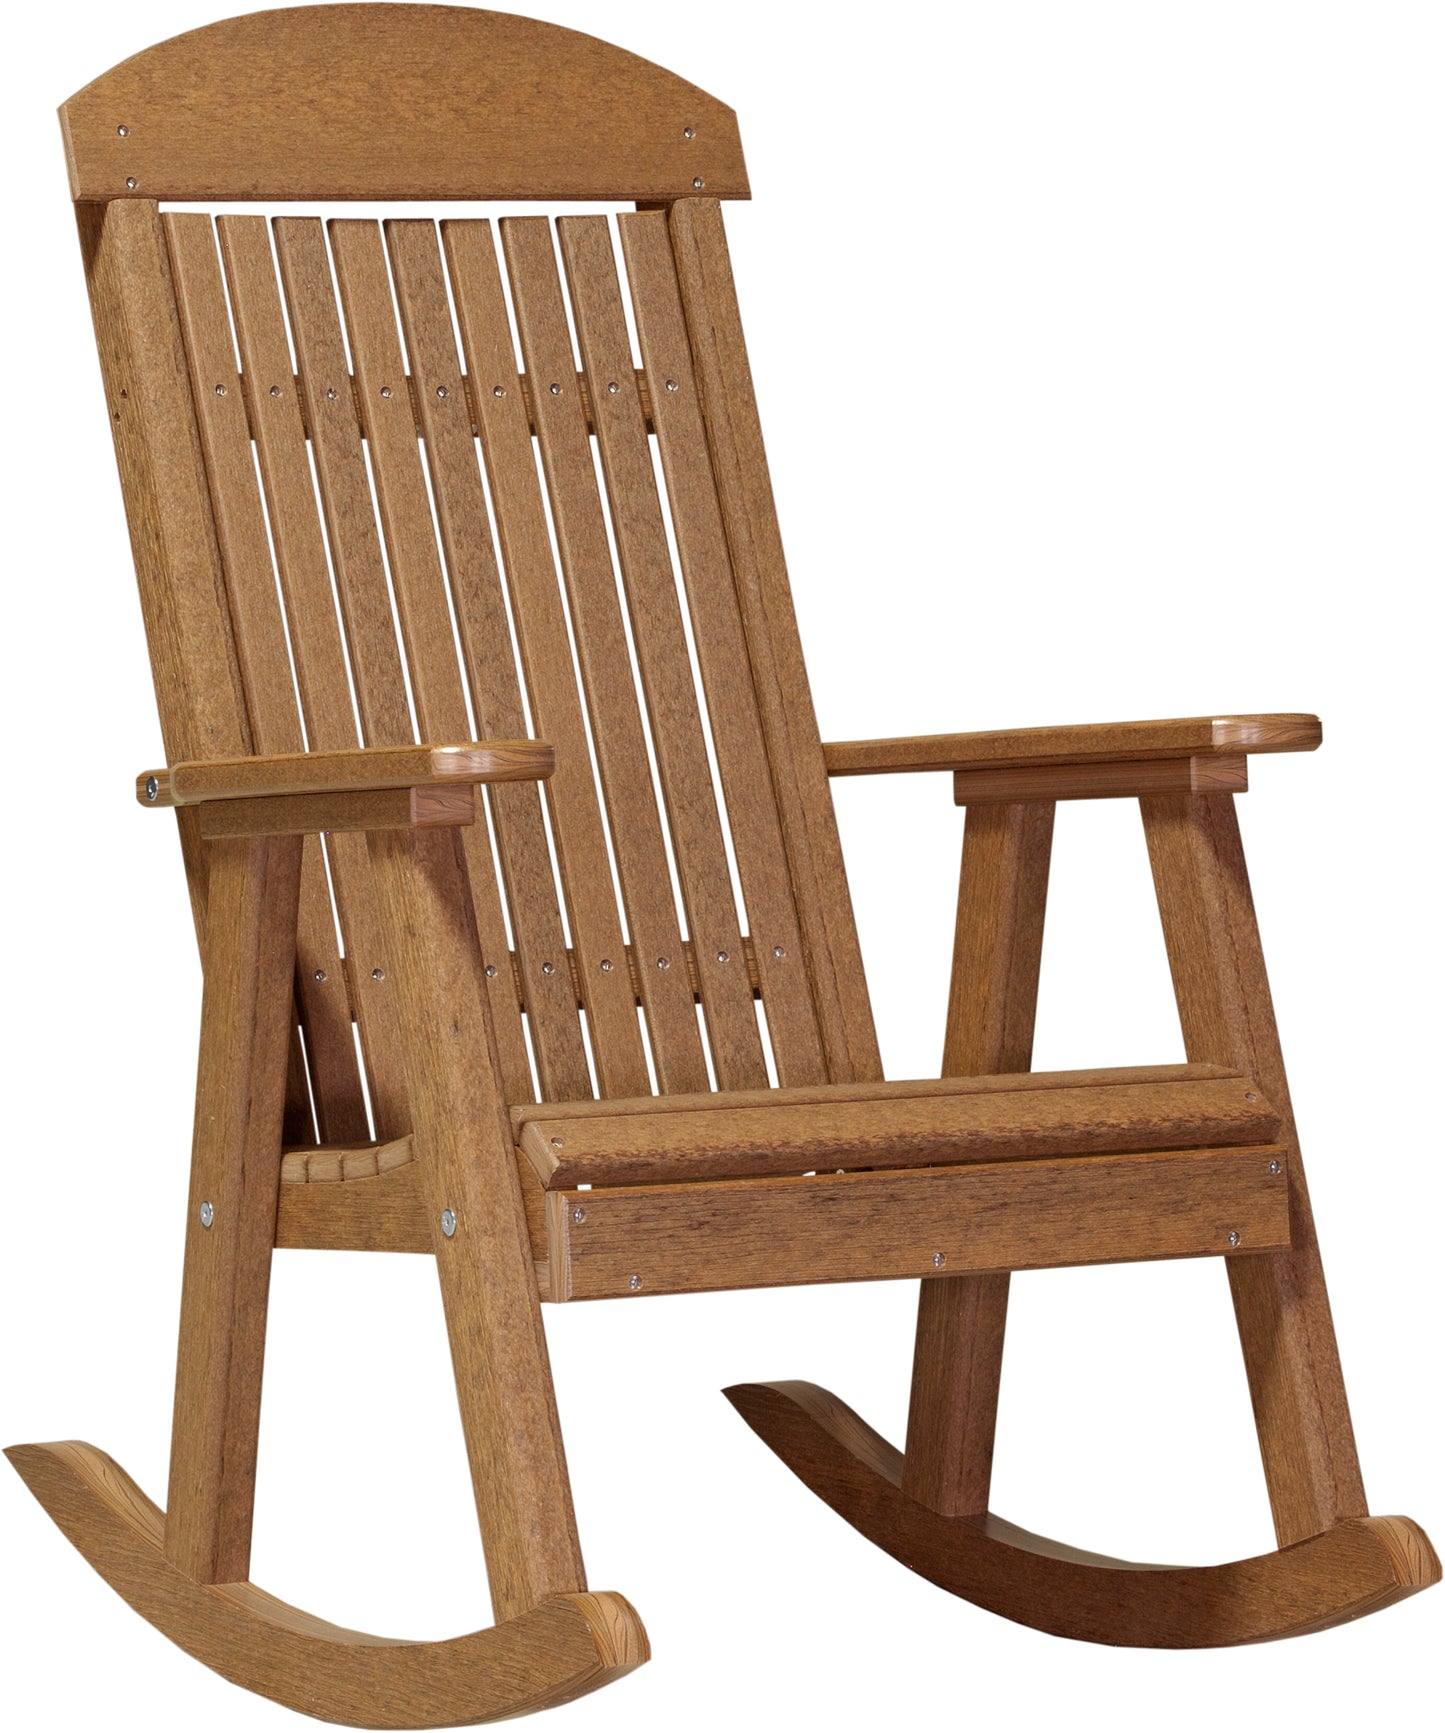 LuxCraft Classic Highback Recycled Plastic Rocking Chair  - LEAD TIME TO SHIP 10 to 12 BUSINESS DAYS